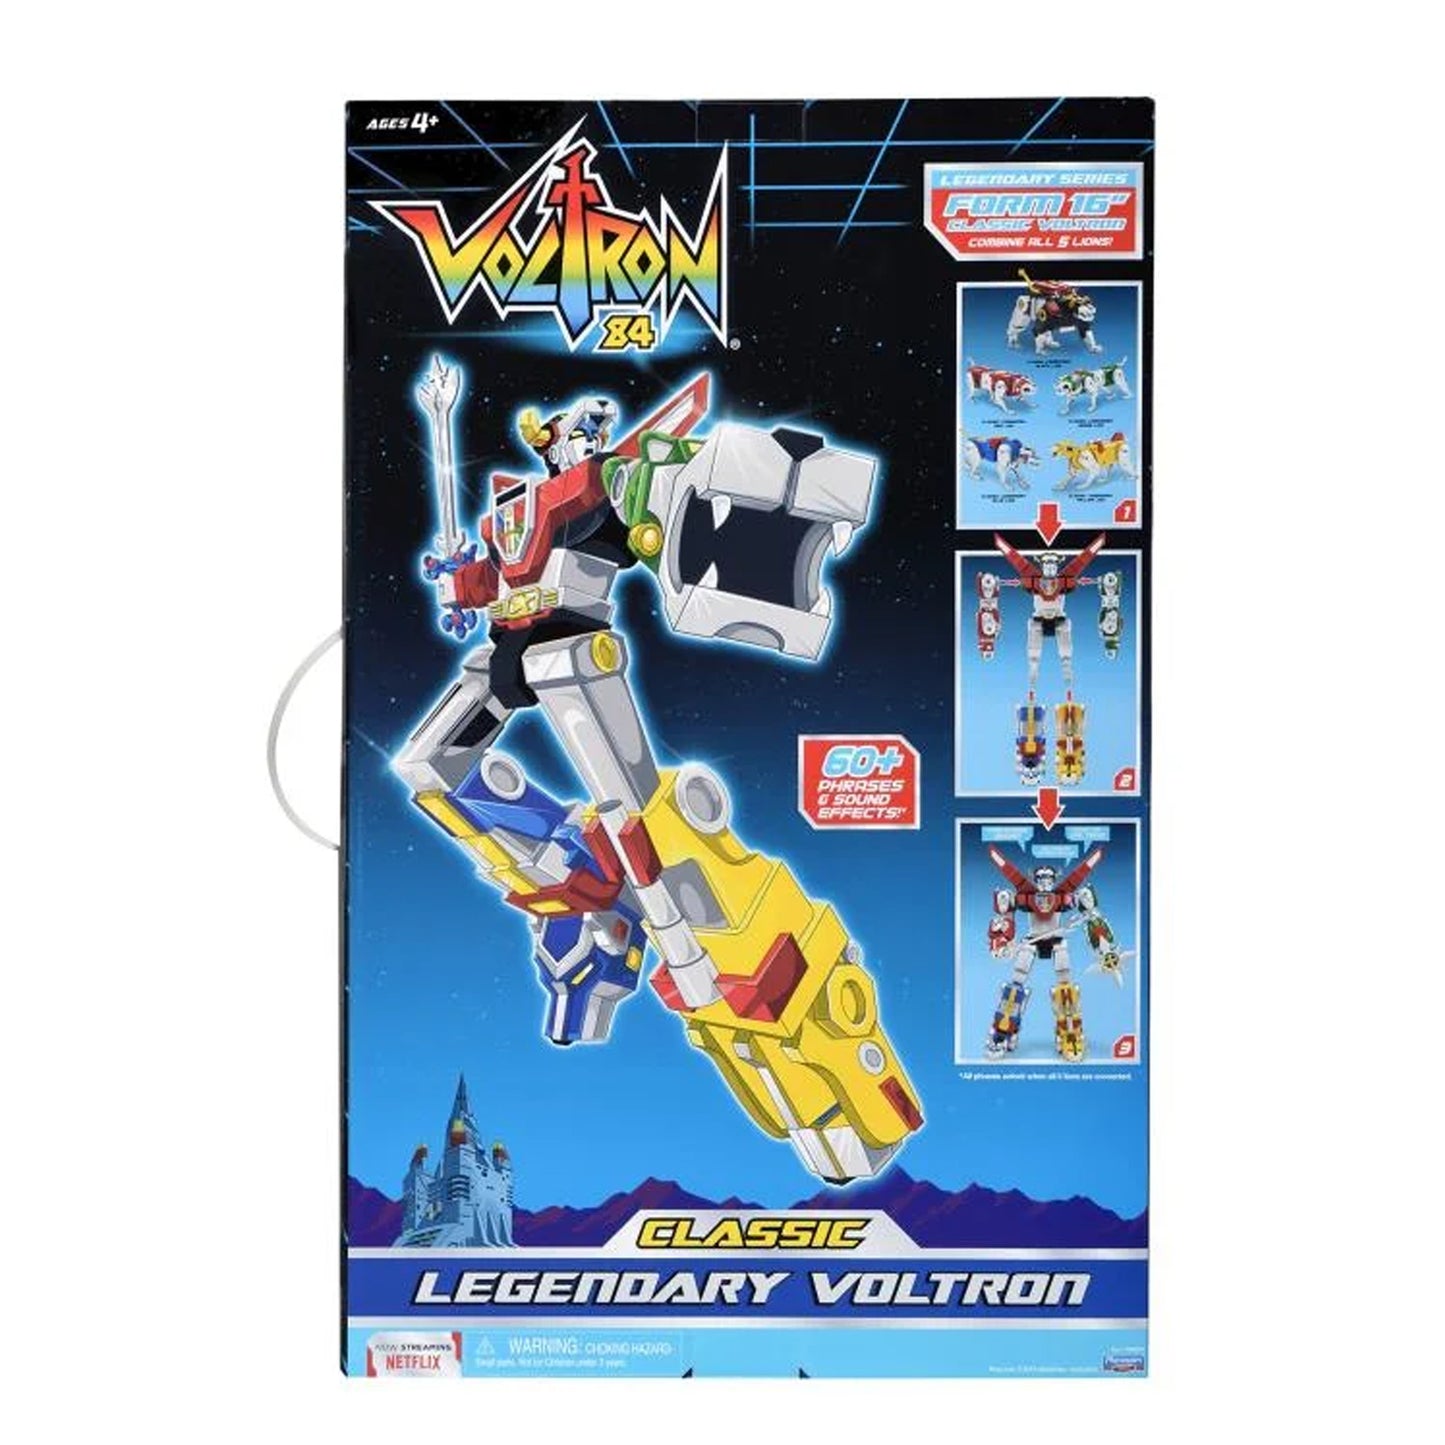 Playmates Defender of the Universe 40th Anniversary Classic Legendary Voltron